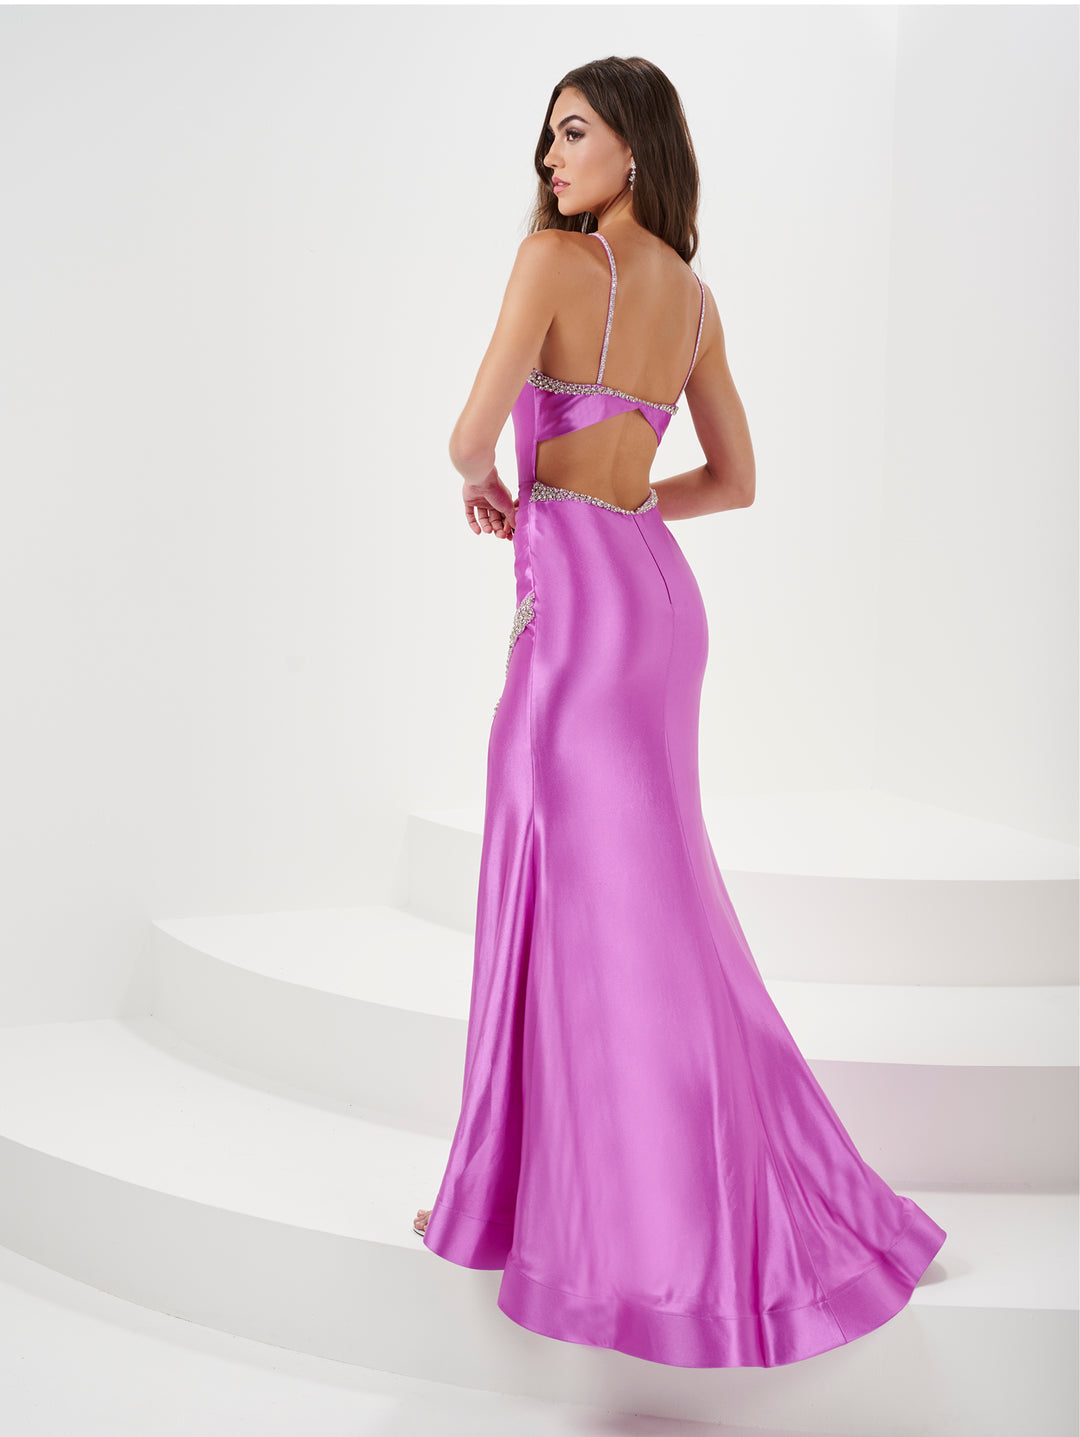 Fitted Beaded Jersey Deep V-Neck Slit Gown by Panoply 14173